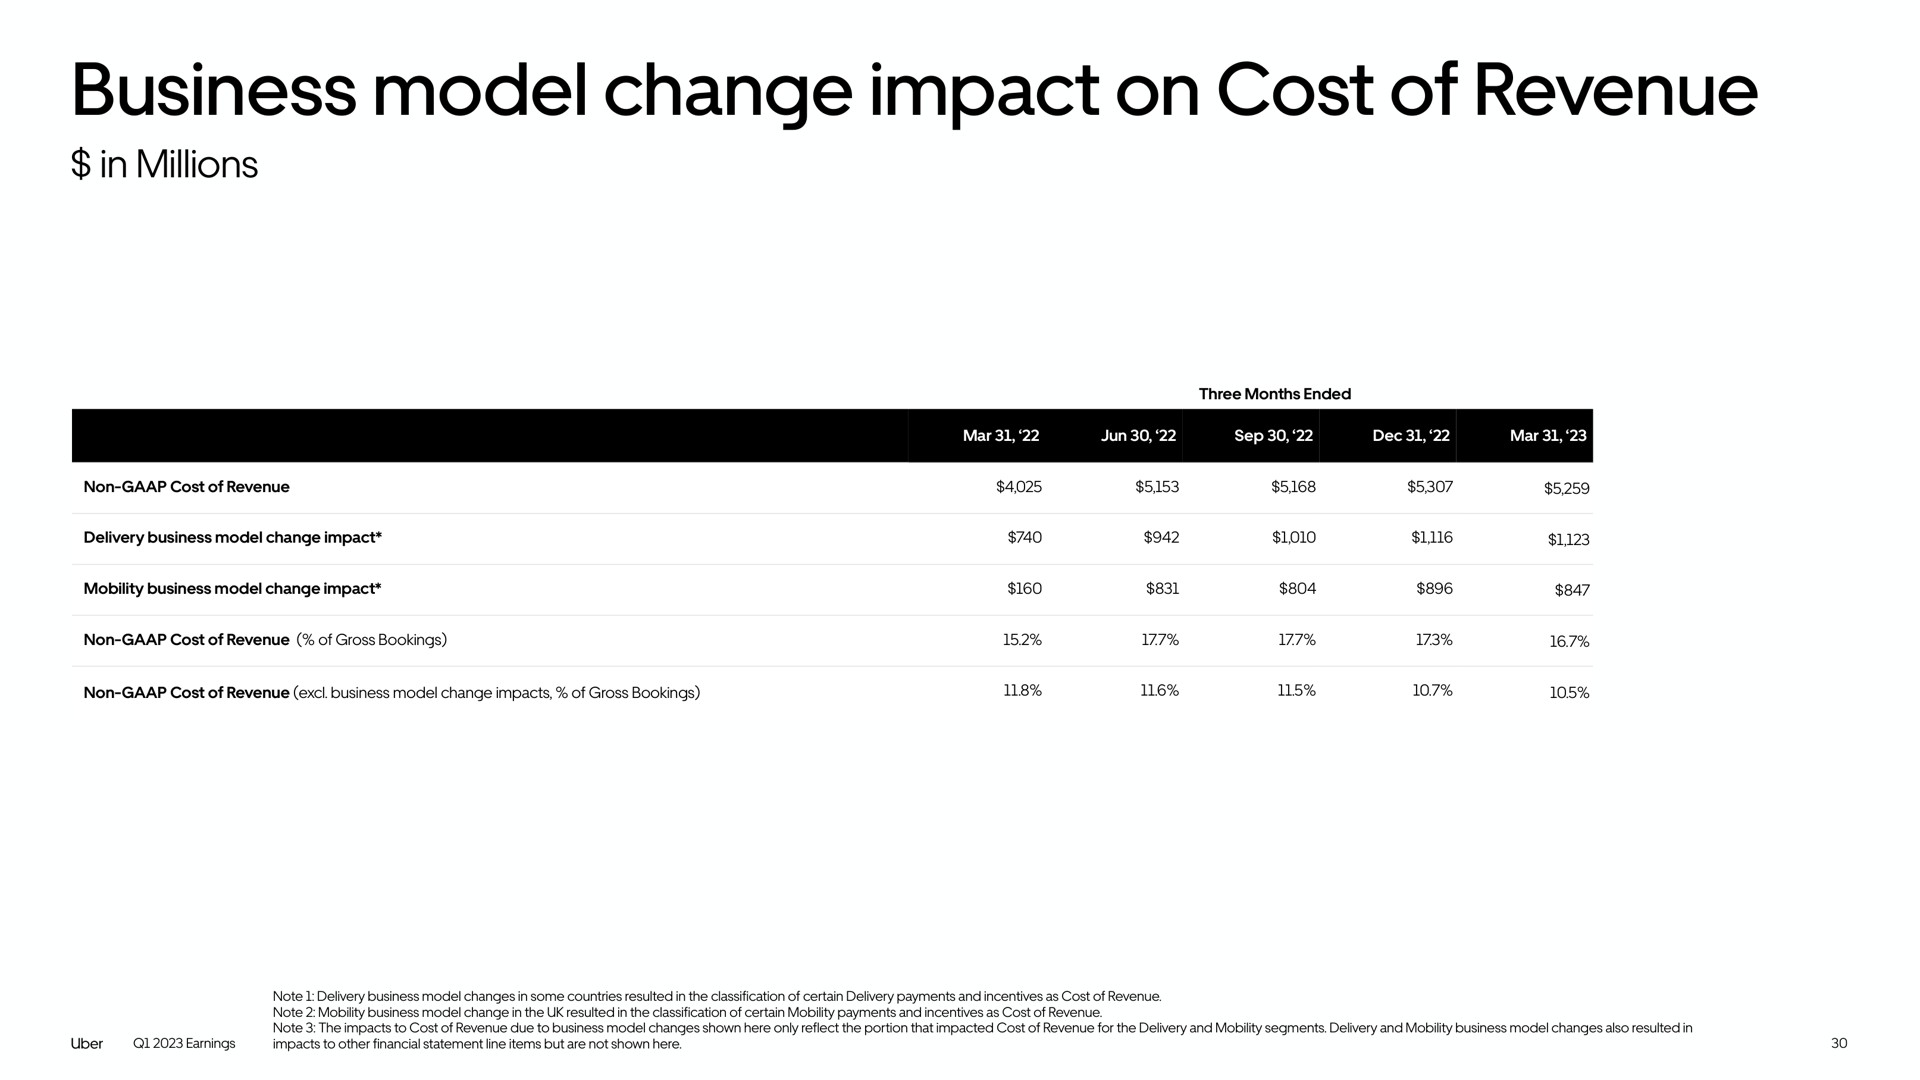 business model change impact on cost of revenue | Uber